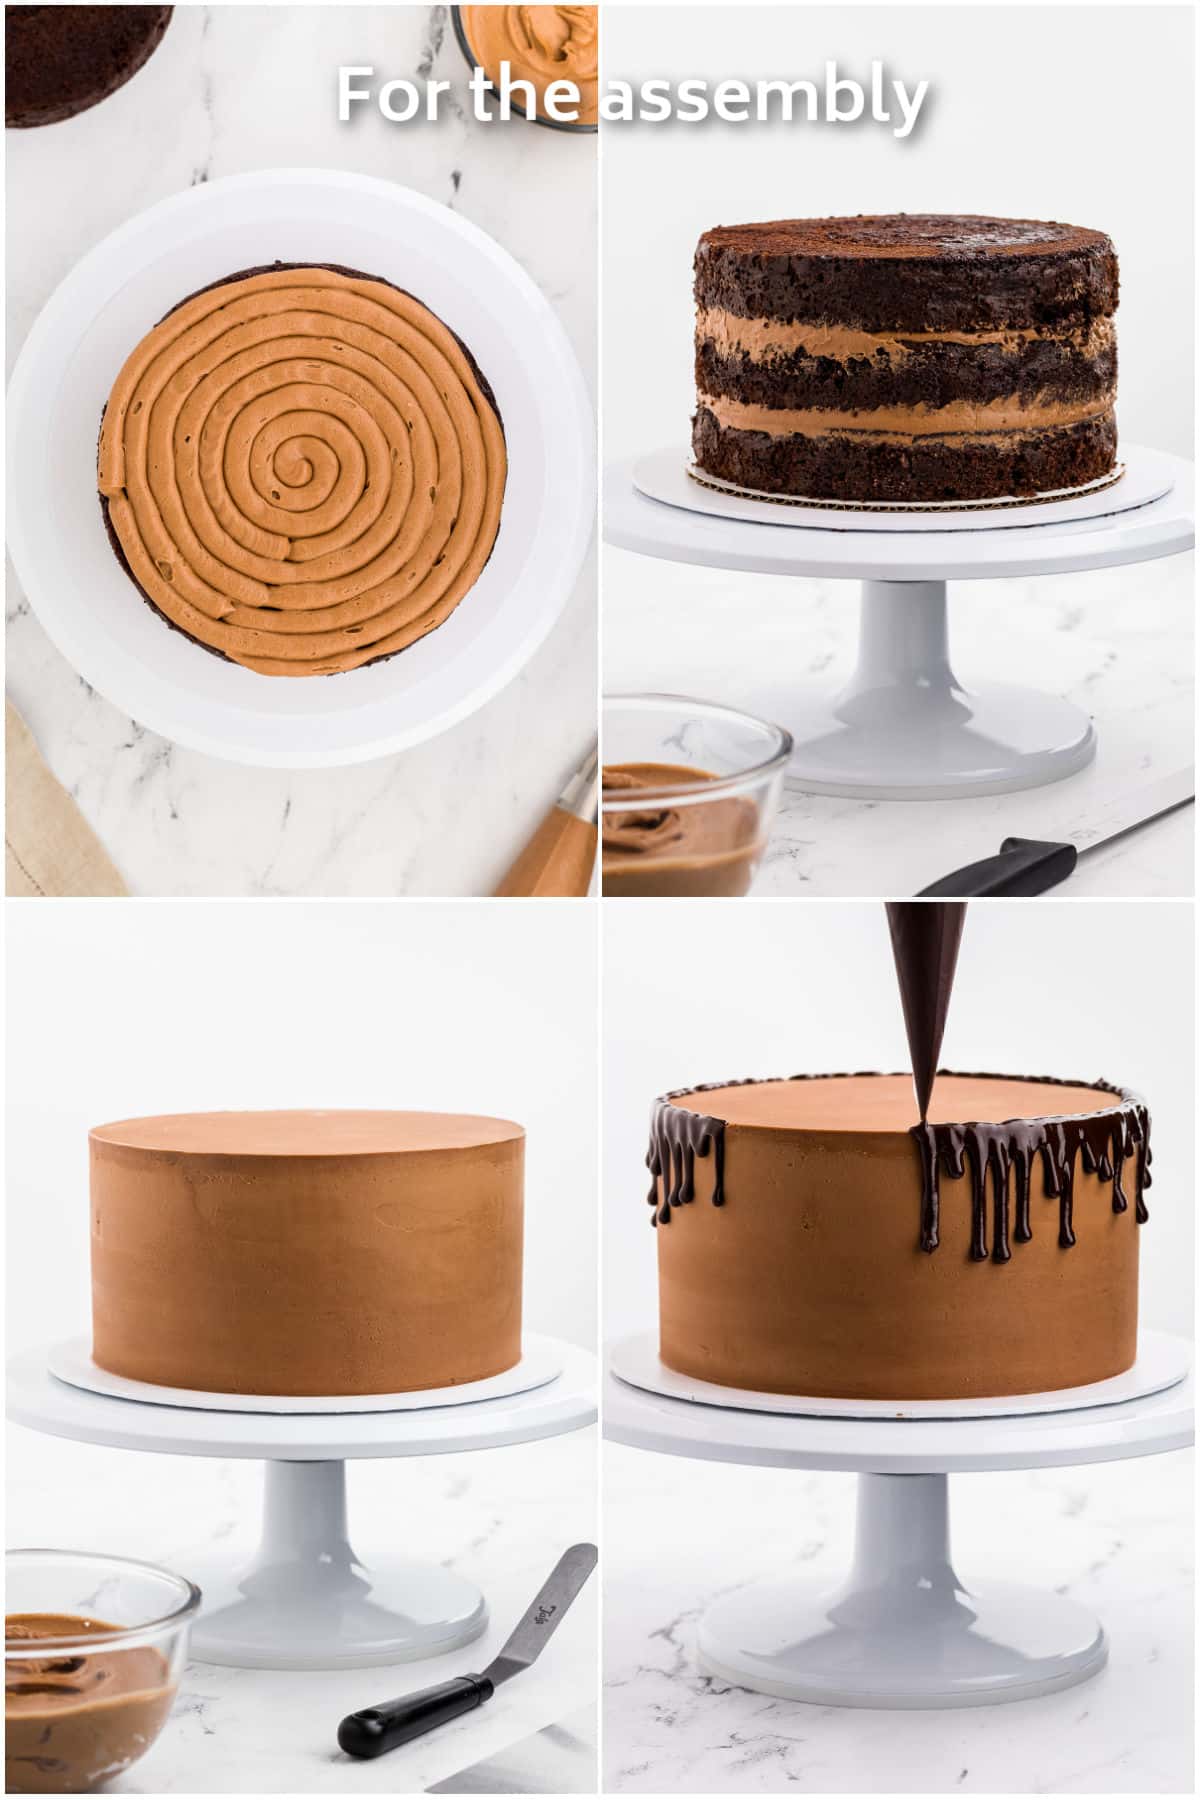 Assembly and frosting of a three layer chocolate cake.